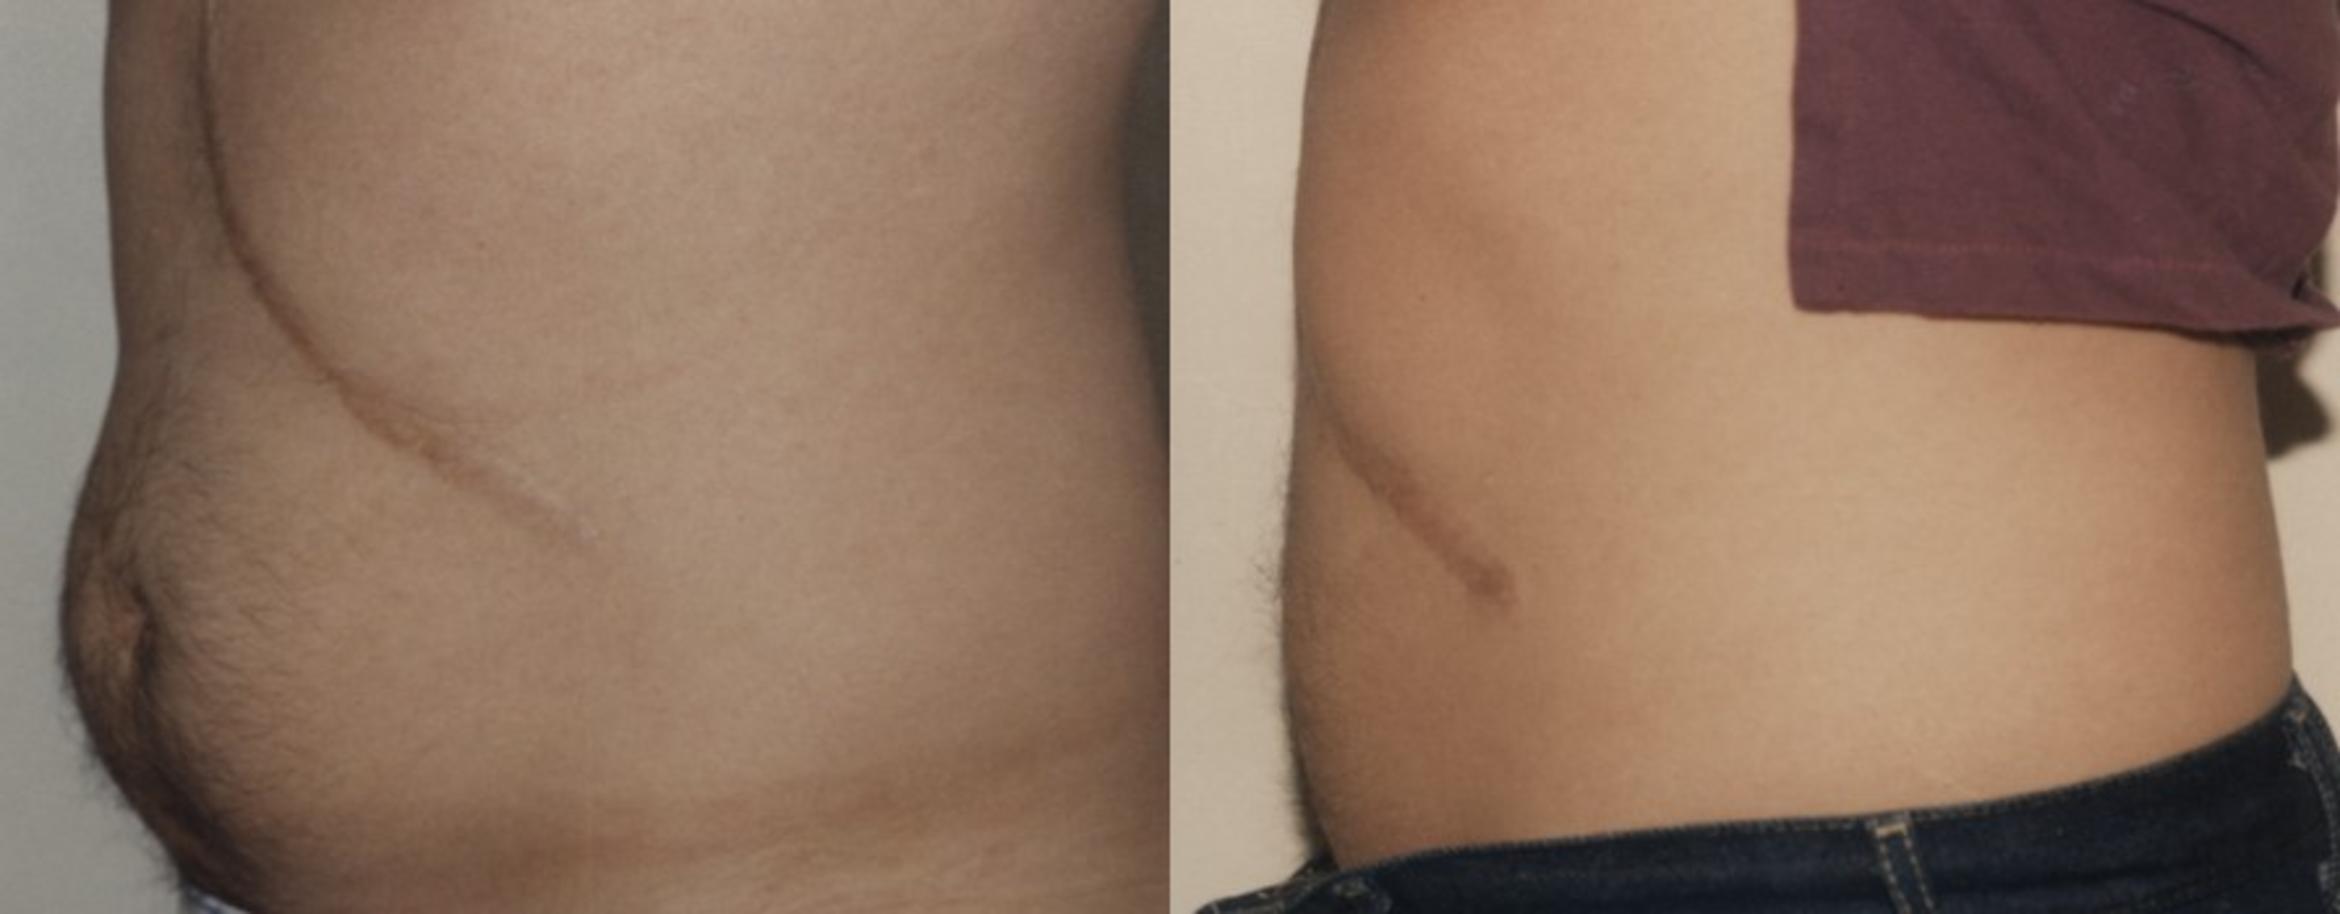 Liposuction Before & After Photo | New Jersey & Pennsylvania,  | The Derm Group